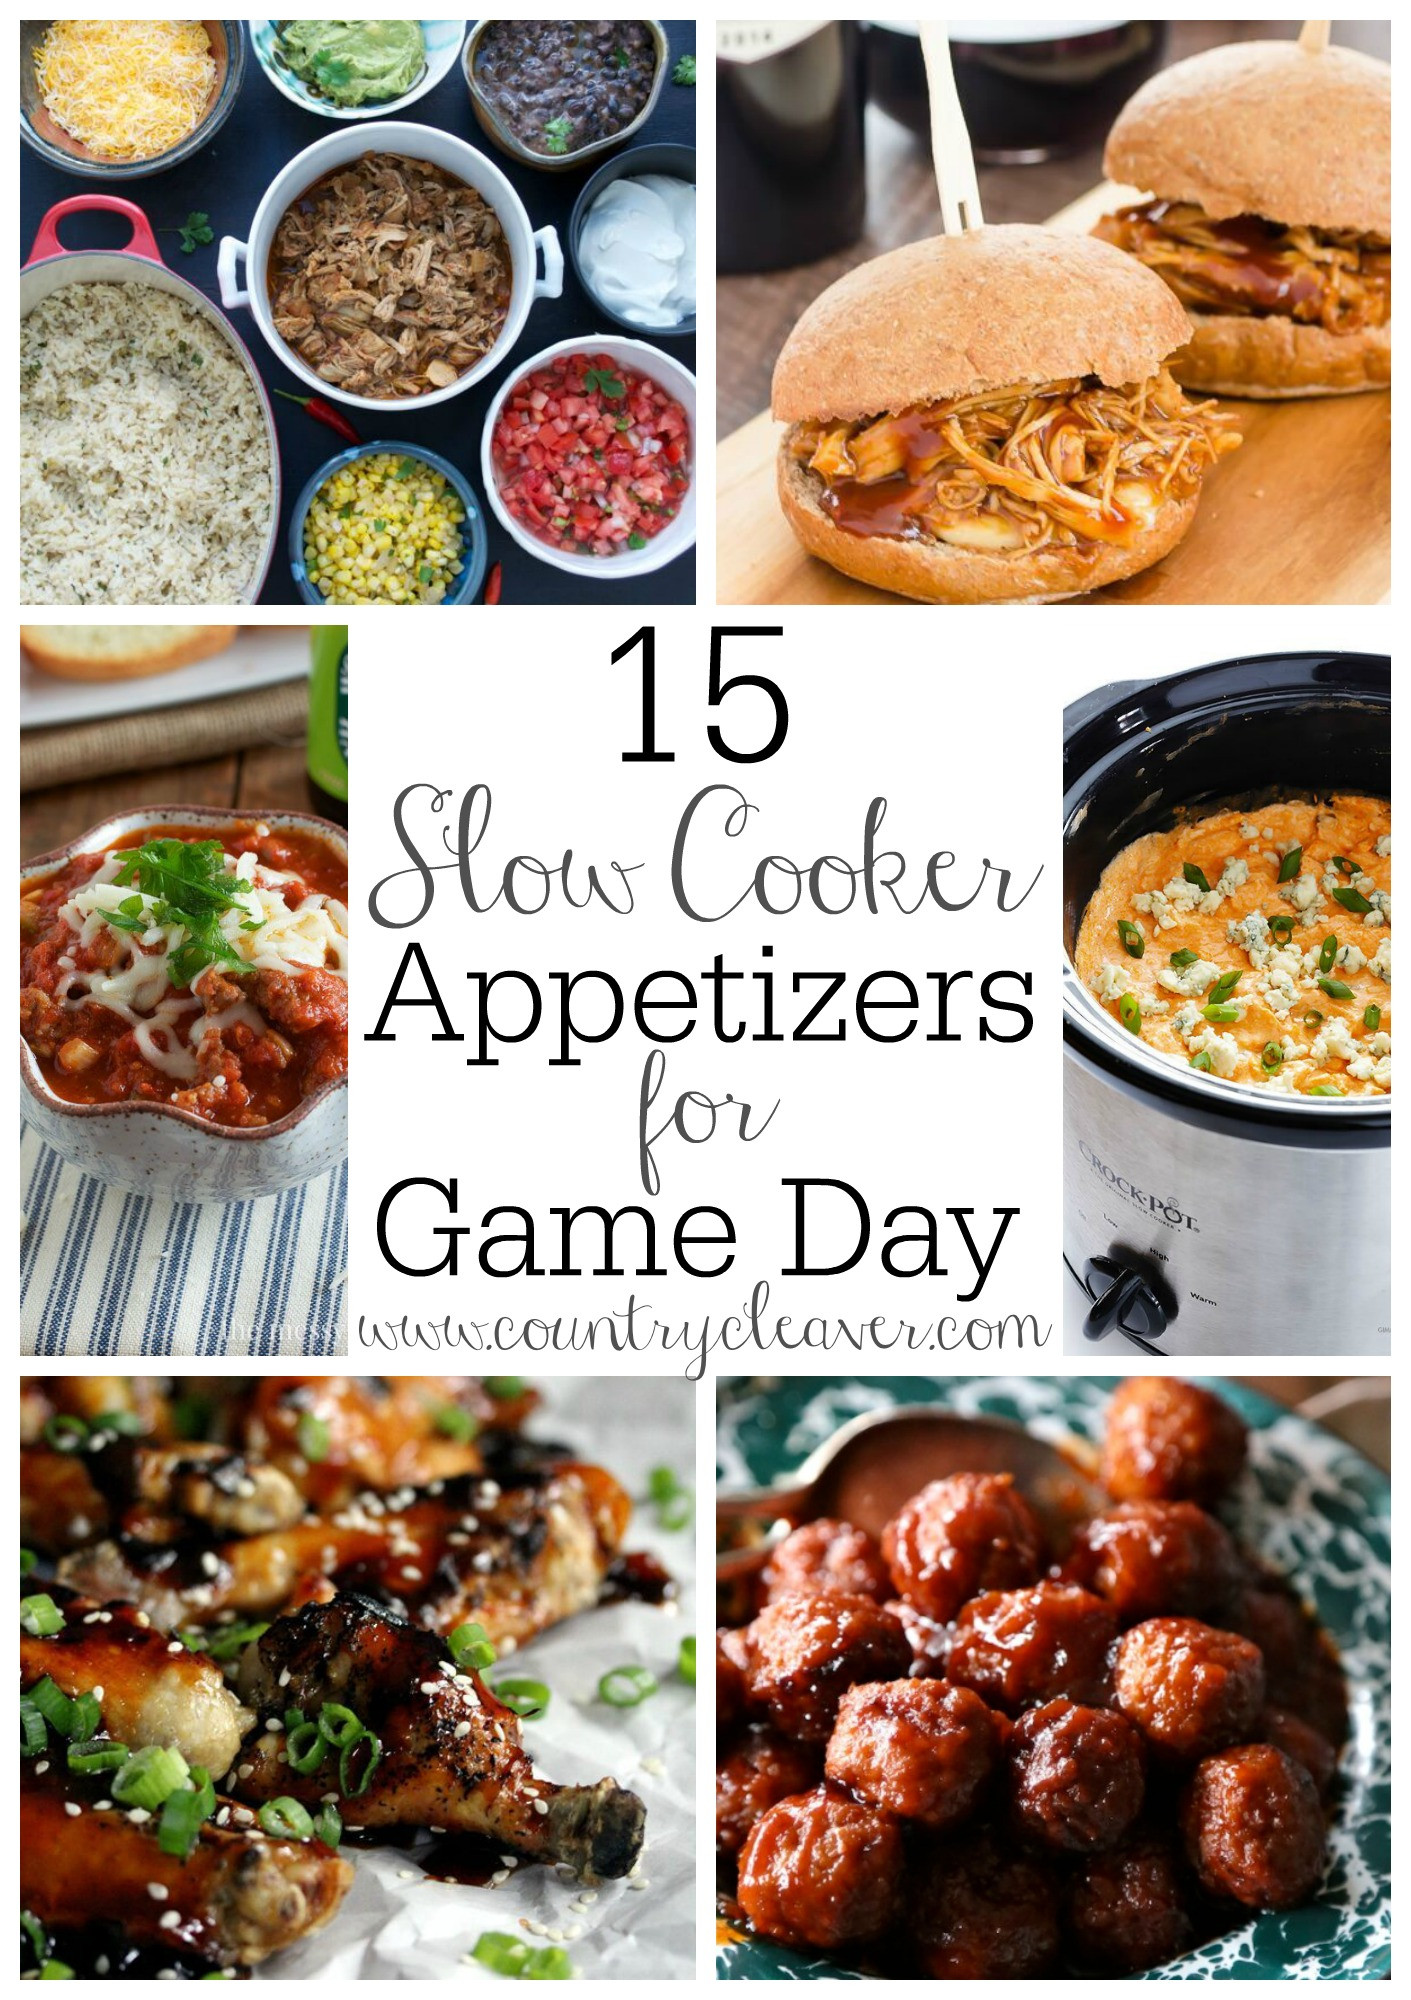 Slow Cooker Appetizers For Party
 15 Slow Cooker Appetizers for Game Day Country Cleaver